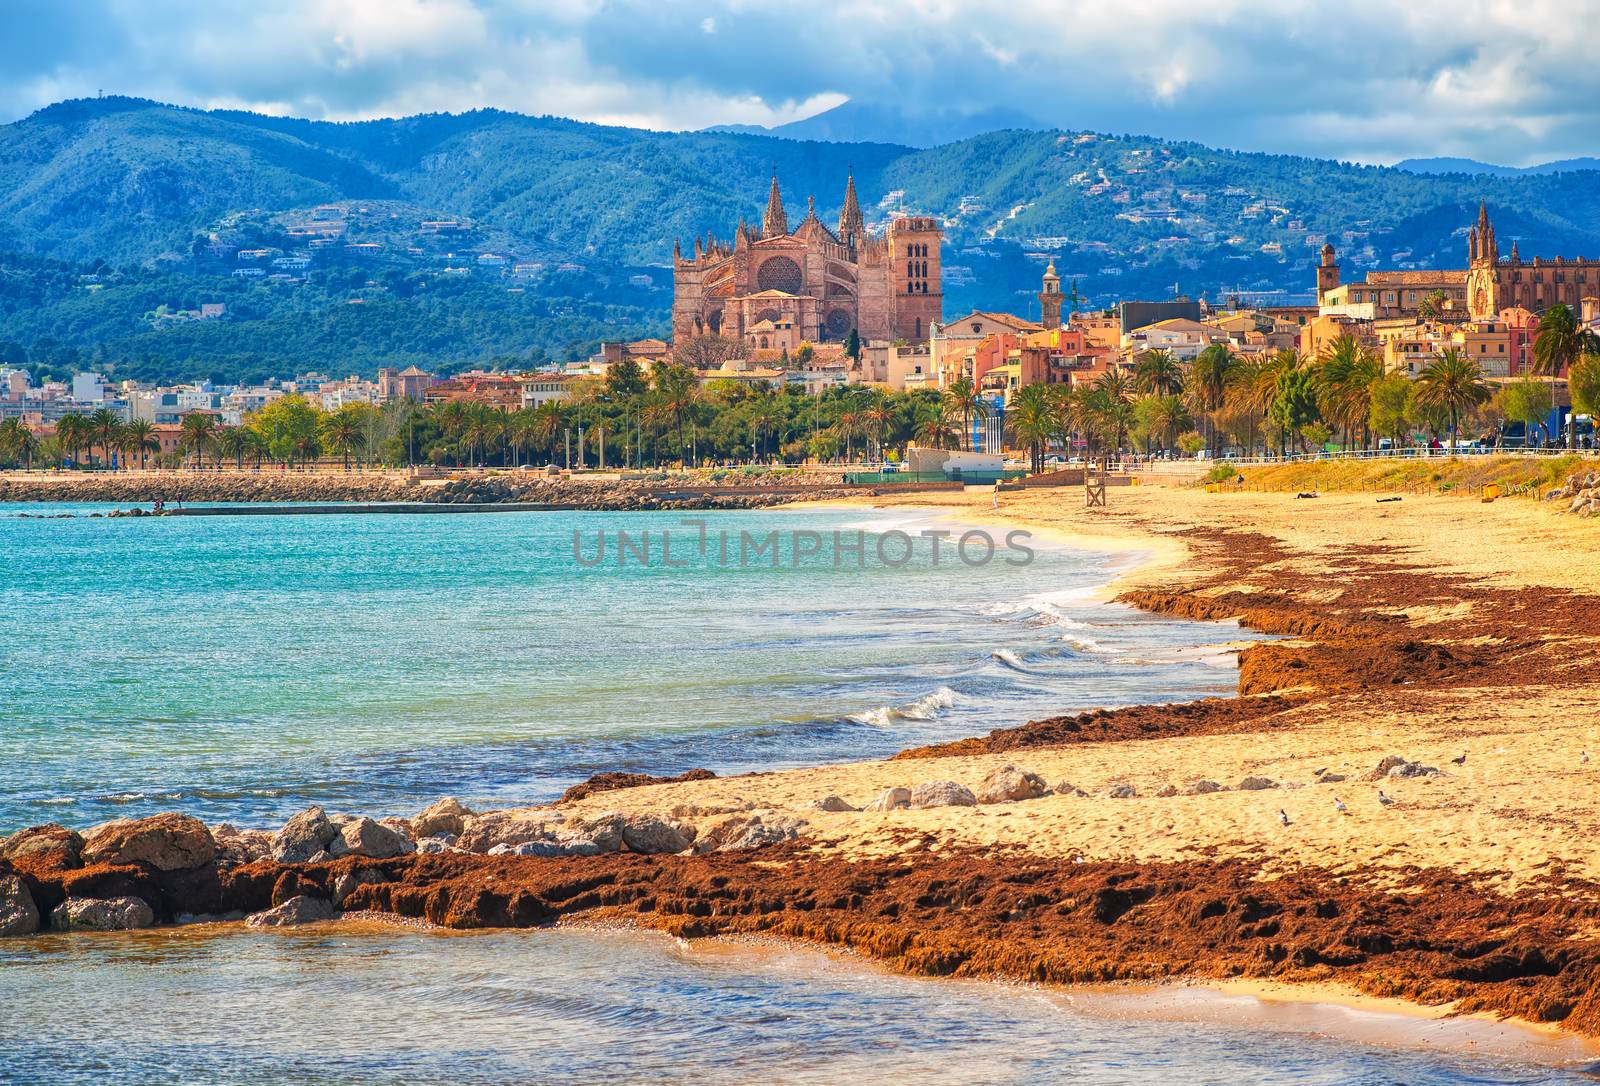 Sand beach in Palma de Mallorca, gothic cathedral in background, Spain by GlobePhotos